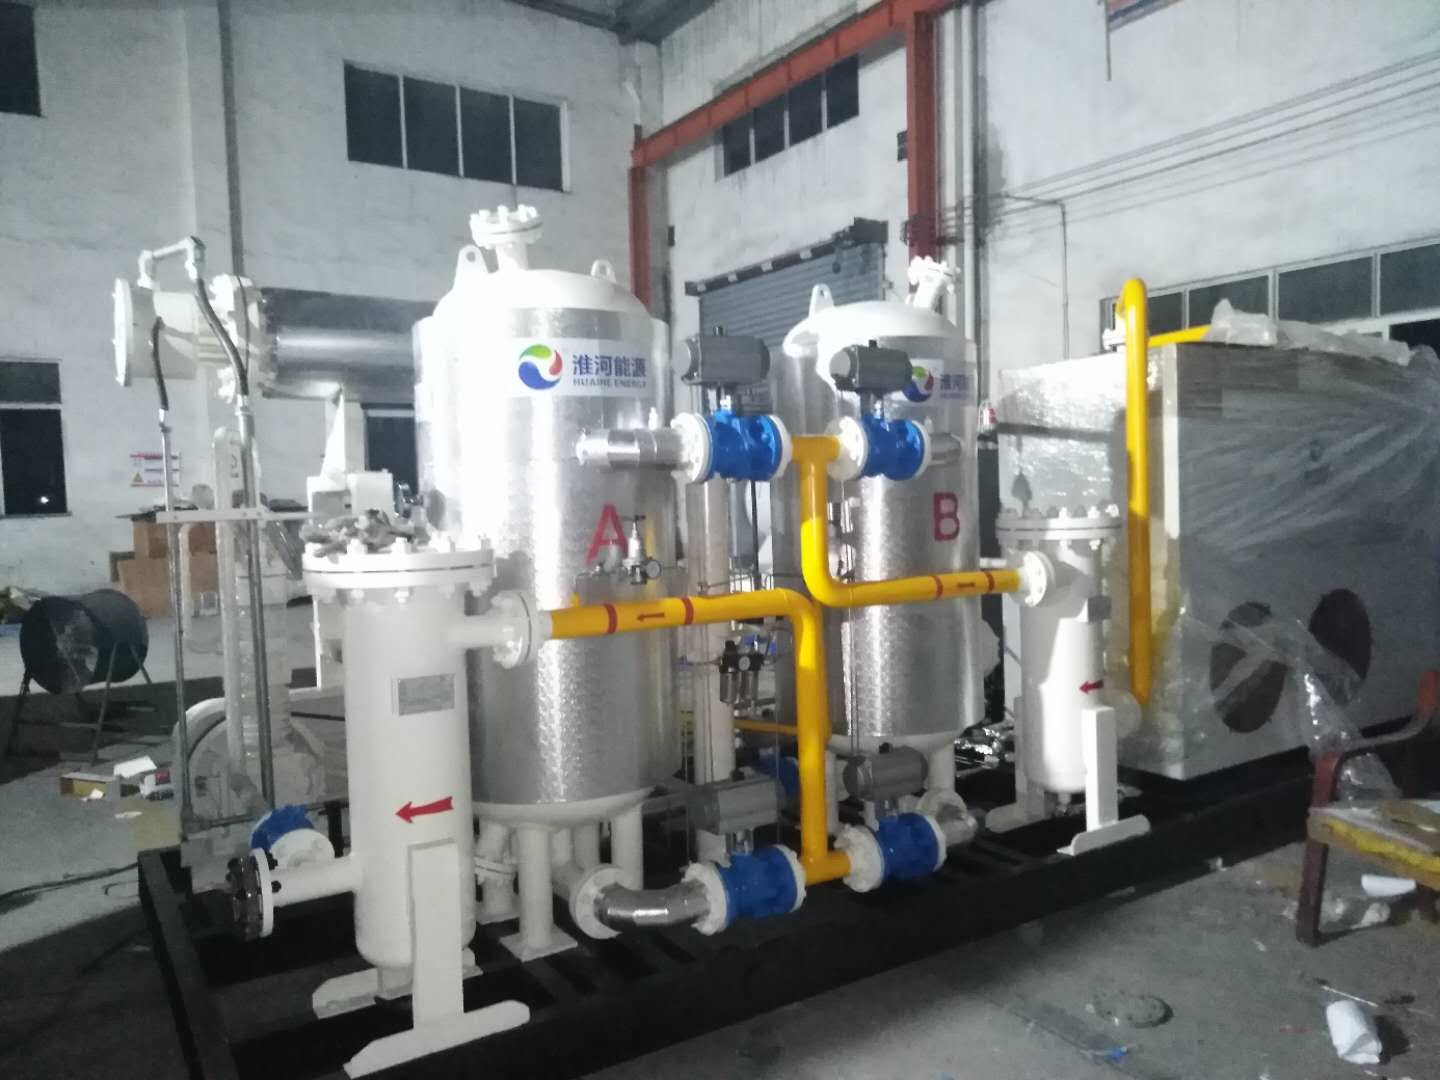 Commissioning and trial operation of natural gas dehydration equipment in factory